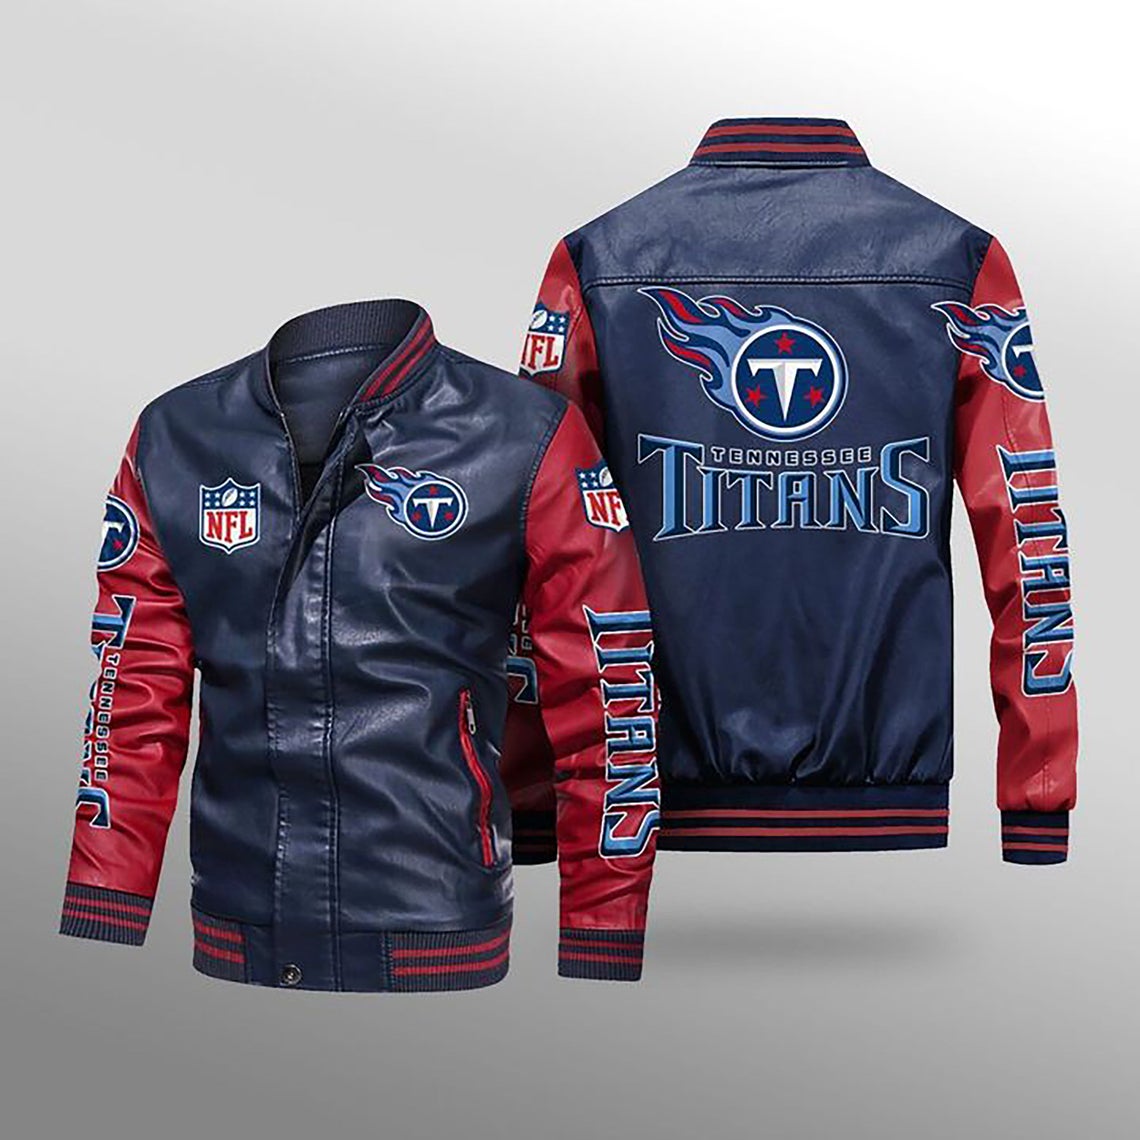 30% OFF The Best Men's Tennessee Titans Leather Jacket For Sale – 4 Fan ...